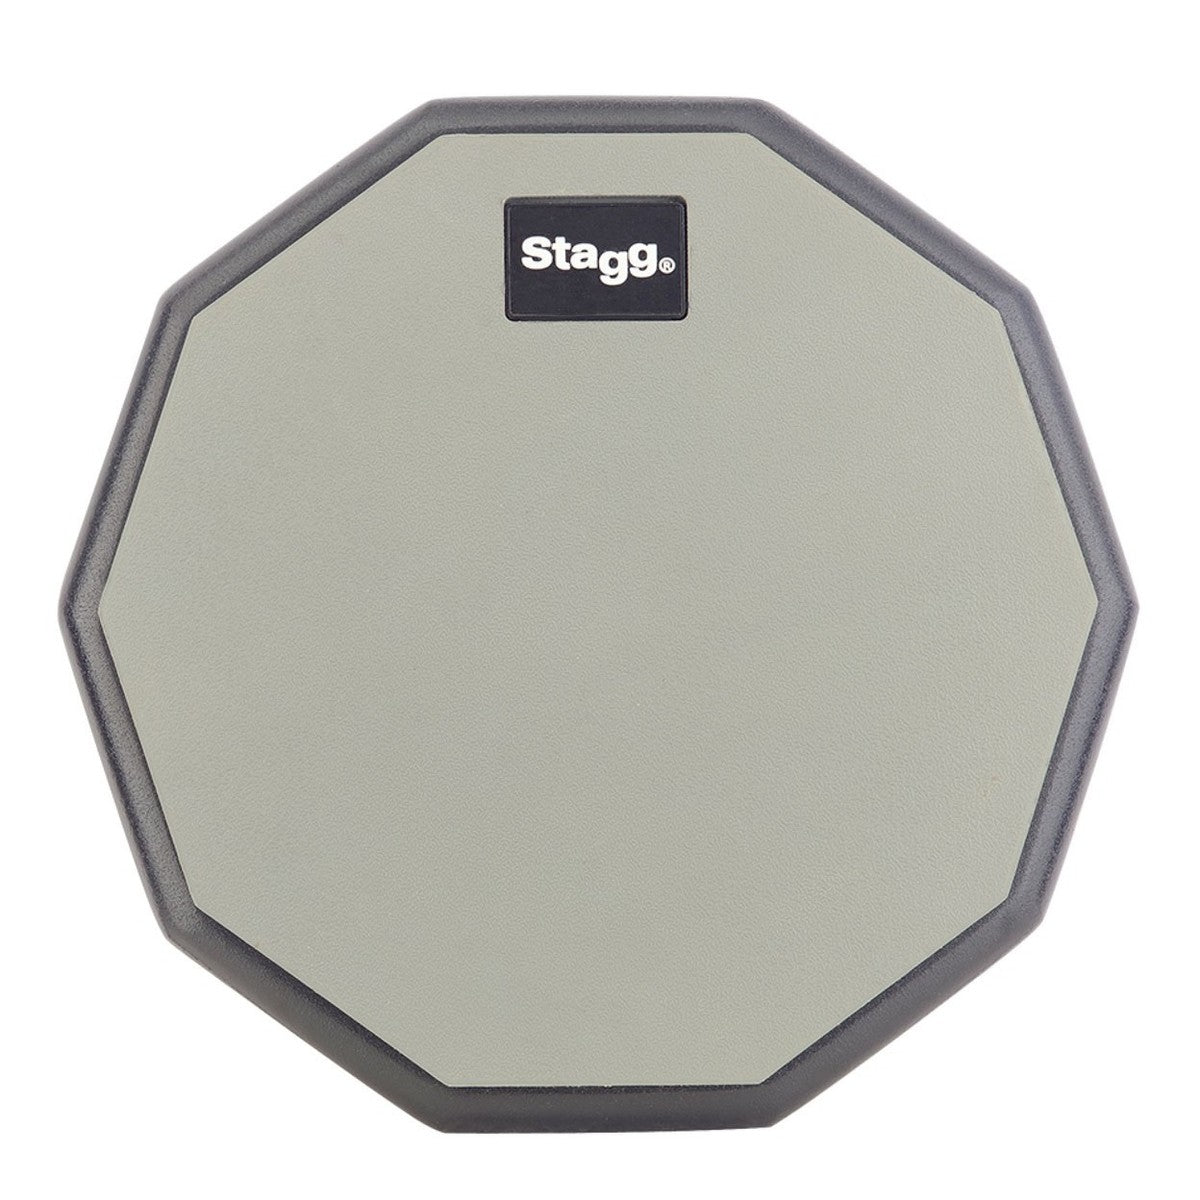 Stagg Practice Pad - TDR